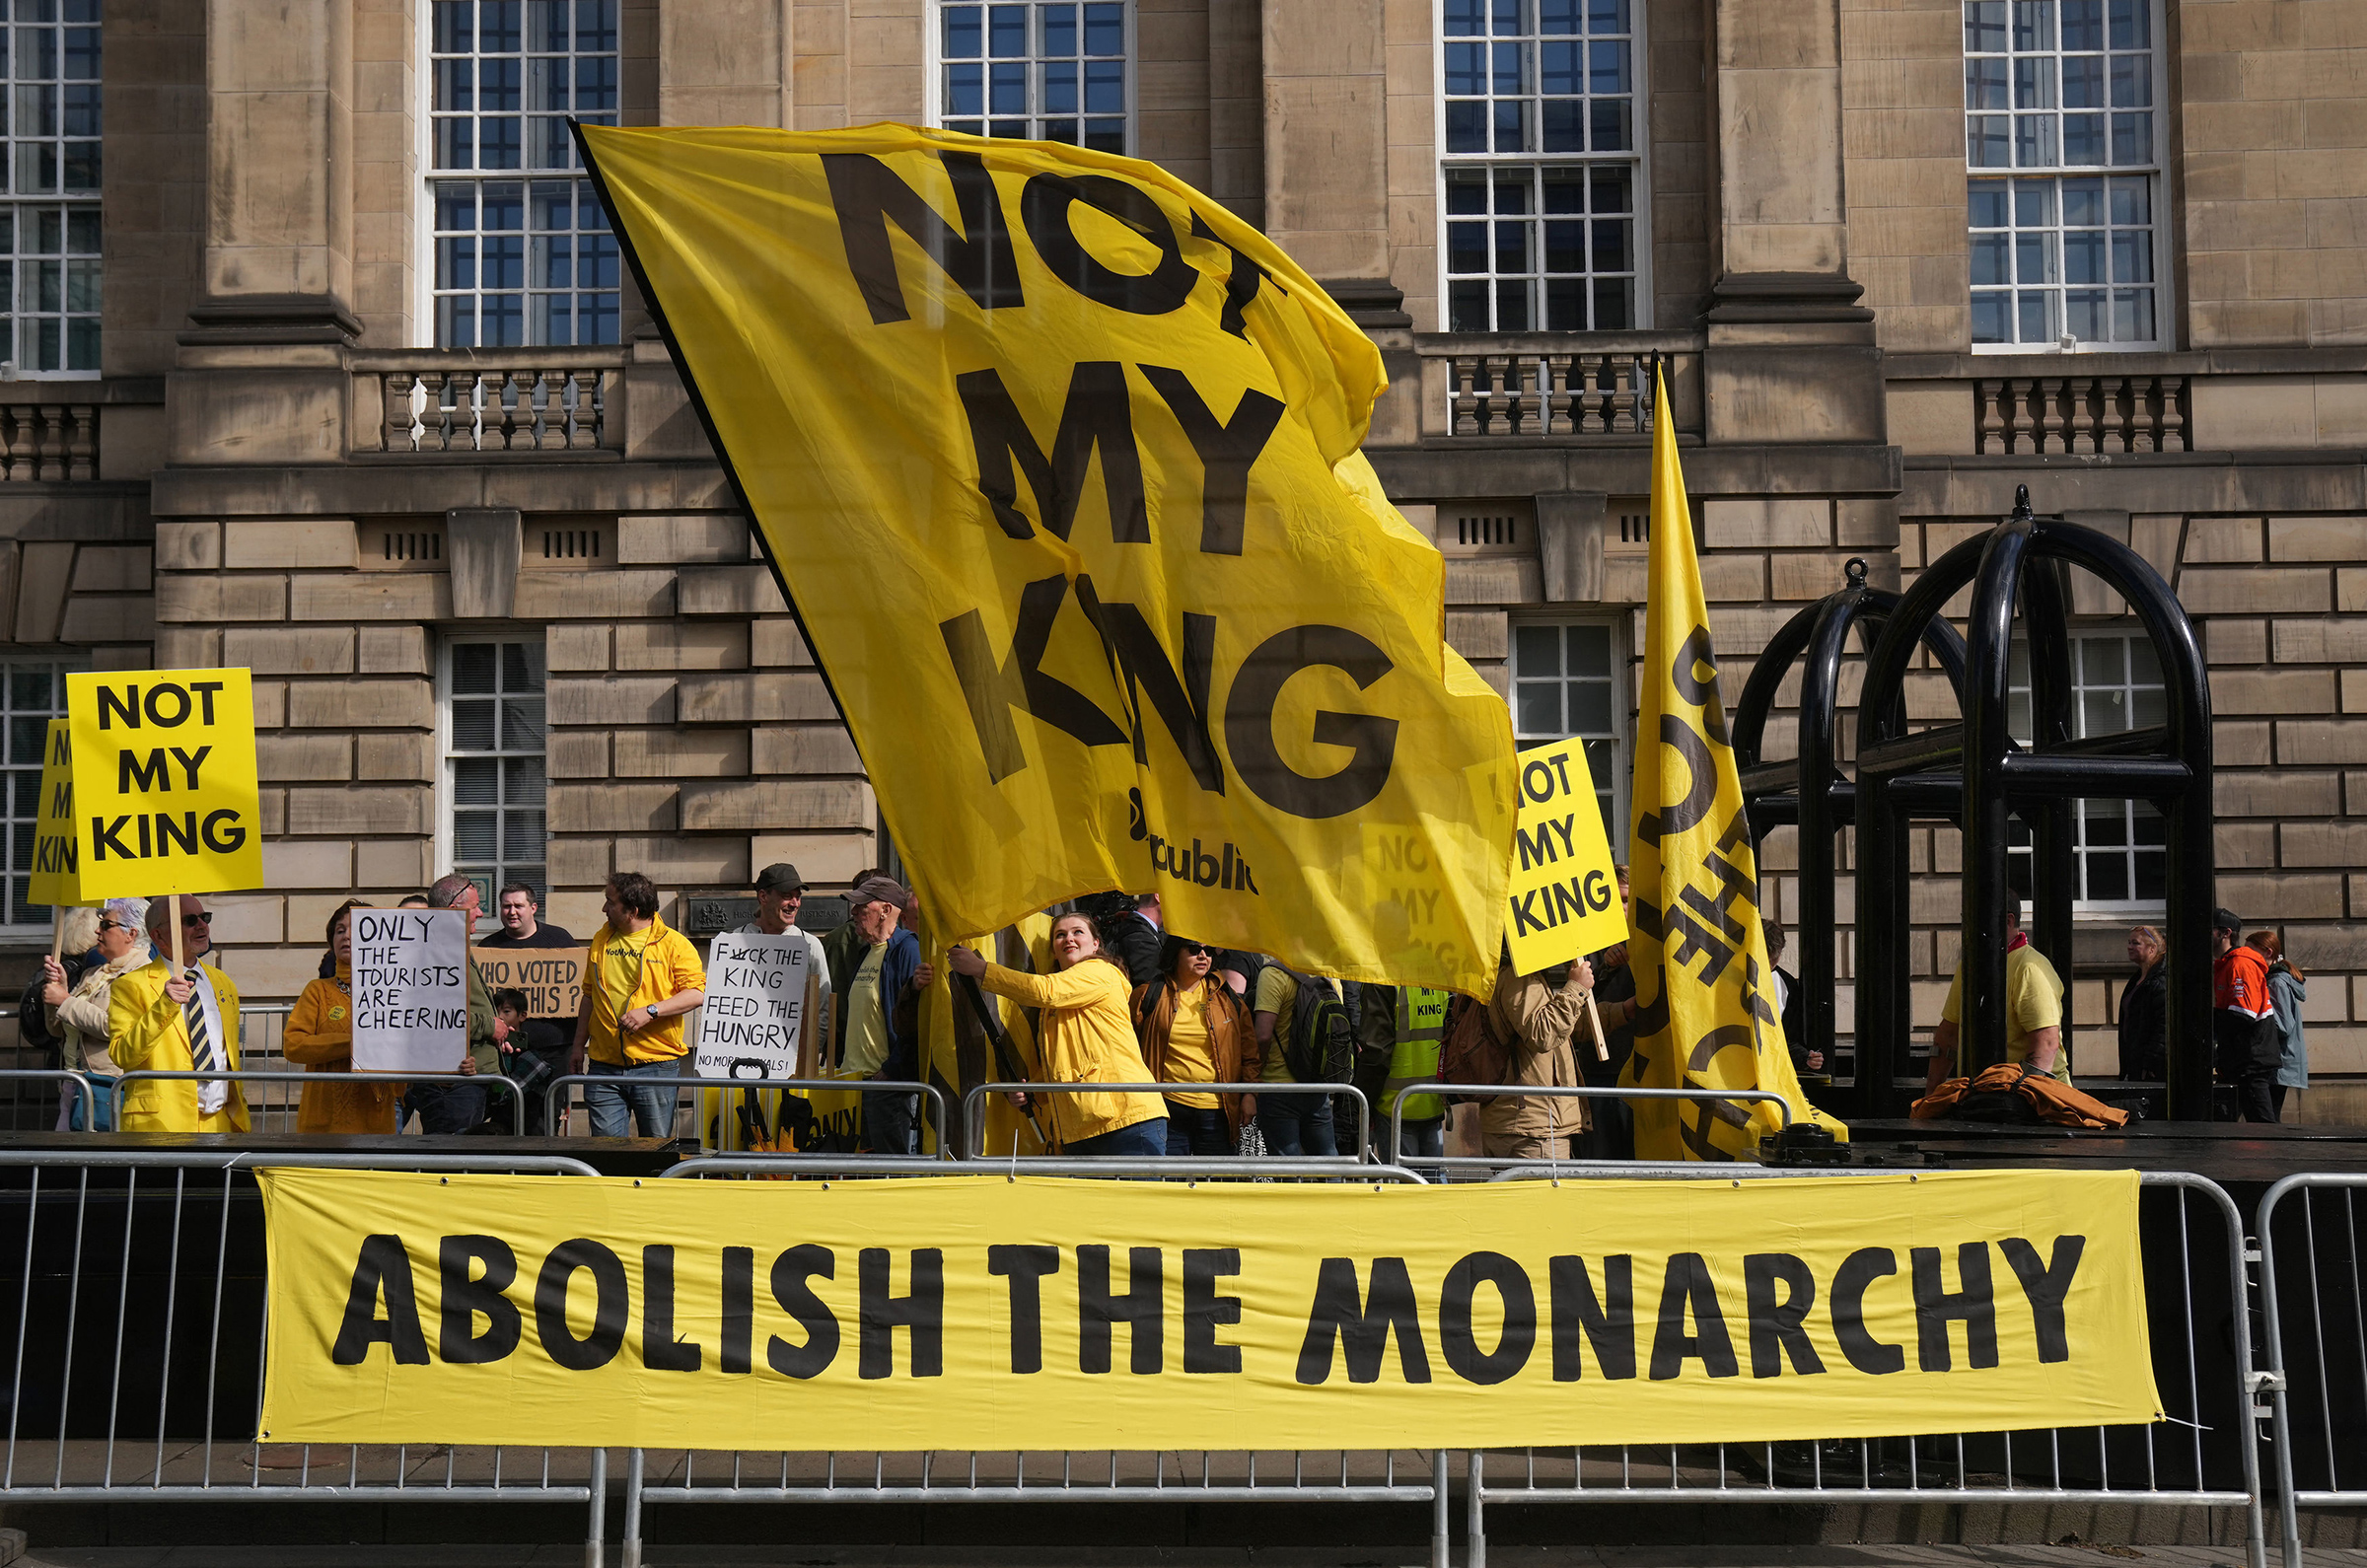 Anti-monarchy protesters gather near St Giles' Cathedral ahead of a National Service of Thanksgiving and Dedication in Edinburgh on July 5. (Danny Lawson—Pool/AFP/Getty Images)